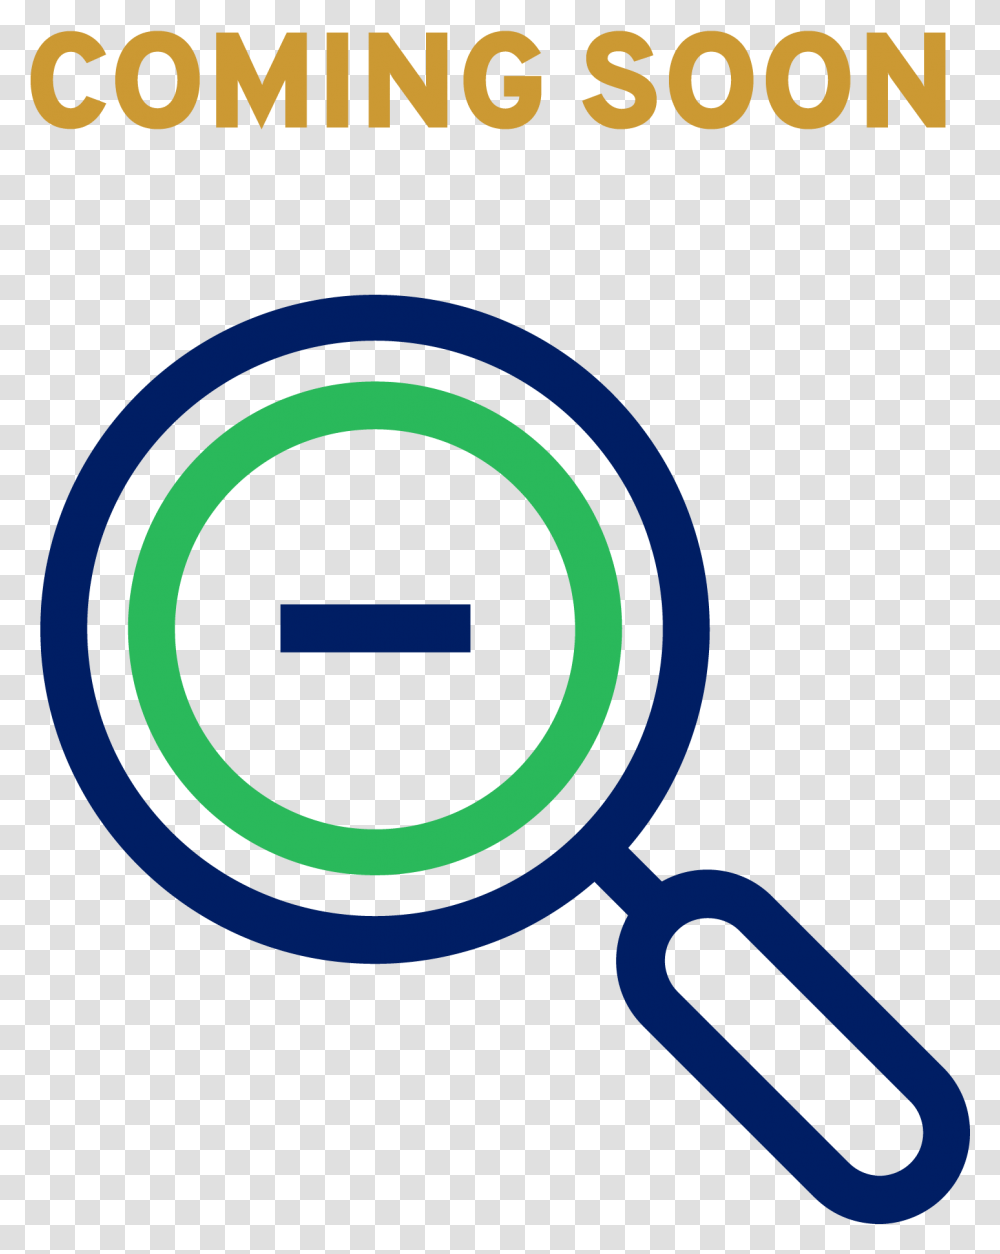 Reducing Control Bluegreen Comming Soon Circle, Magnifying Transparent Png